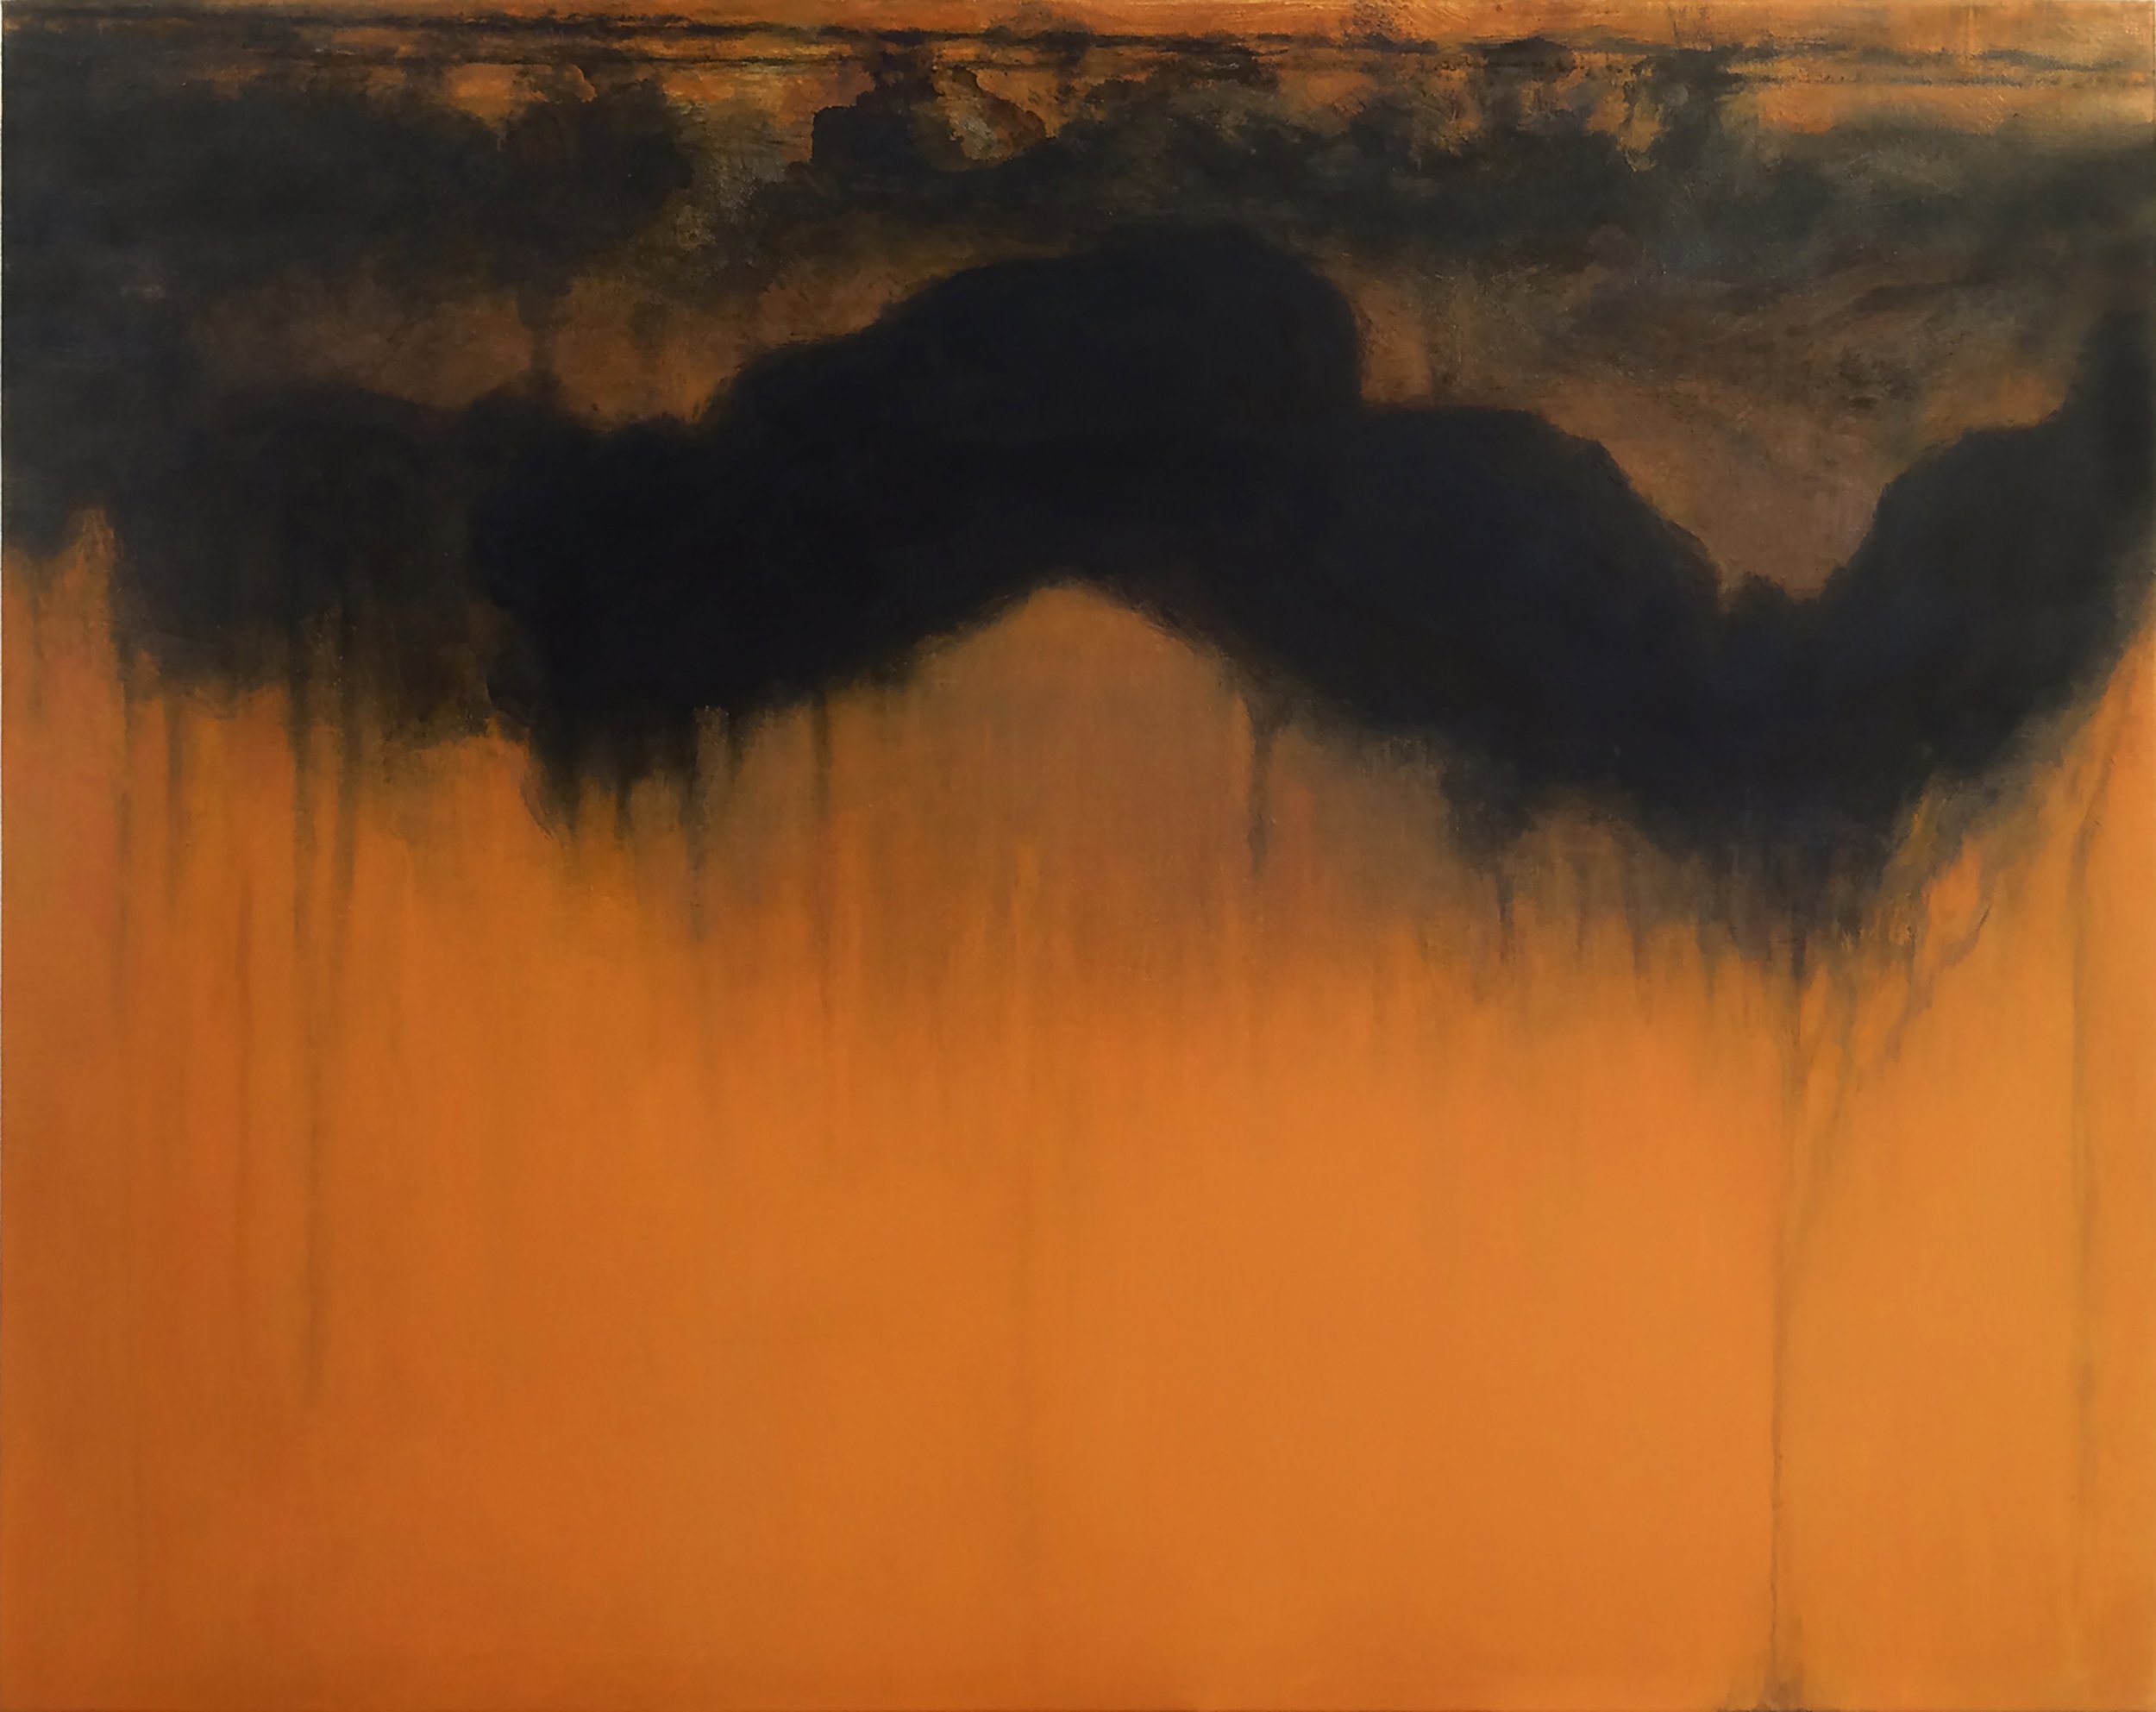   Susan Osgood   Brattleboro, VT  @susanosgoodvt   Rust River , 2022 Oil on canvas 24 x 30 inches  Susan Osgood graduated from the Rhode Island School of Design with honors in 1978 and has focused on painting, drawing, and printmaking ever since. A 1